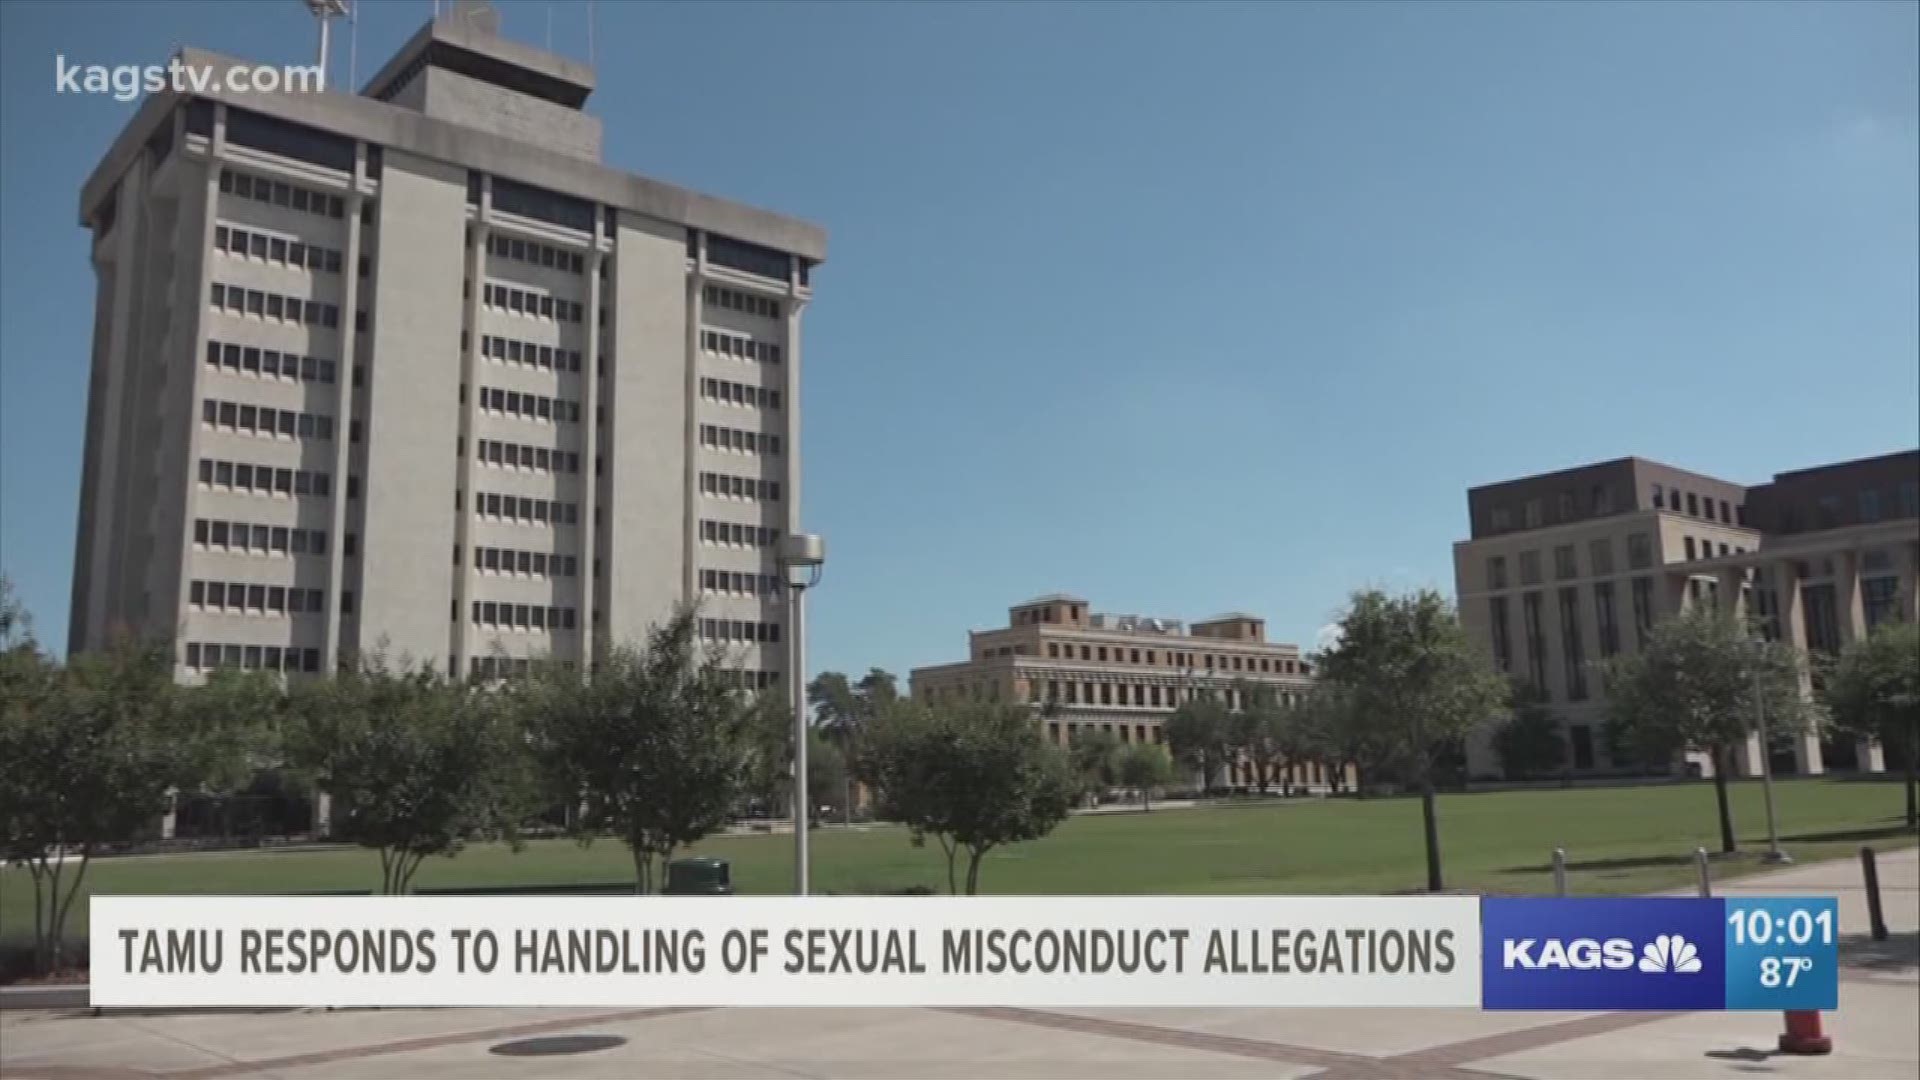 Texas A&M released a statement responding to allegations and an online petition that say they mishandled reports of sexual assault.